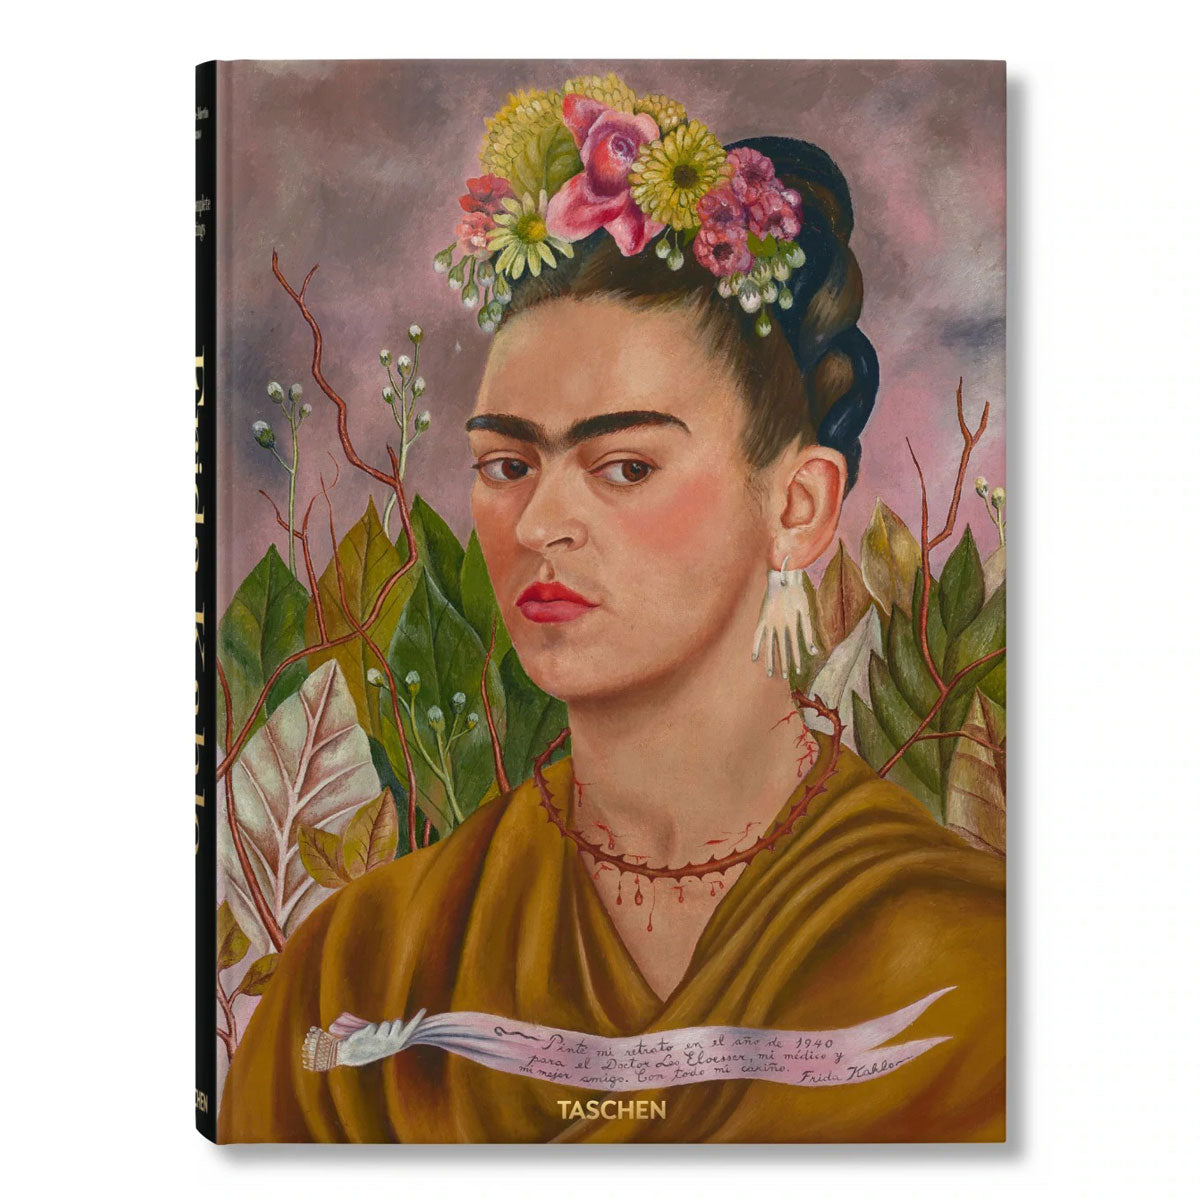 Frida Kahlo: The Complete Paintings - SFMOMA Museum Store